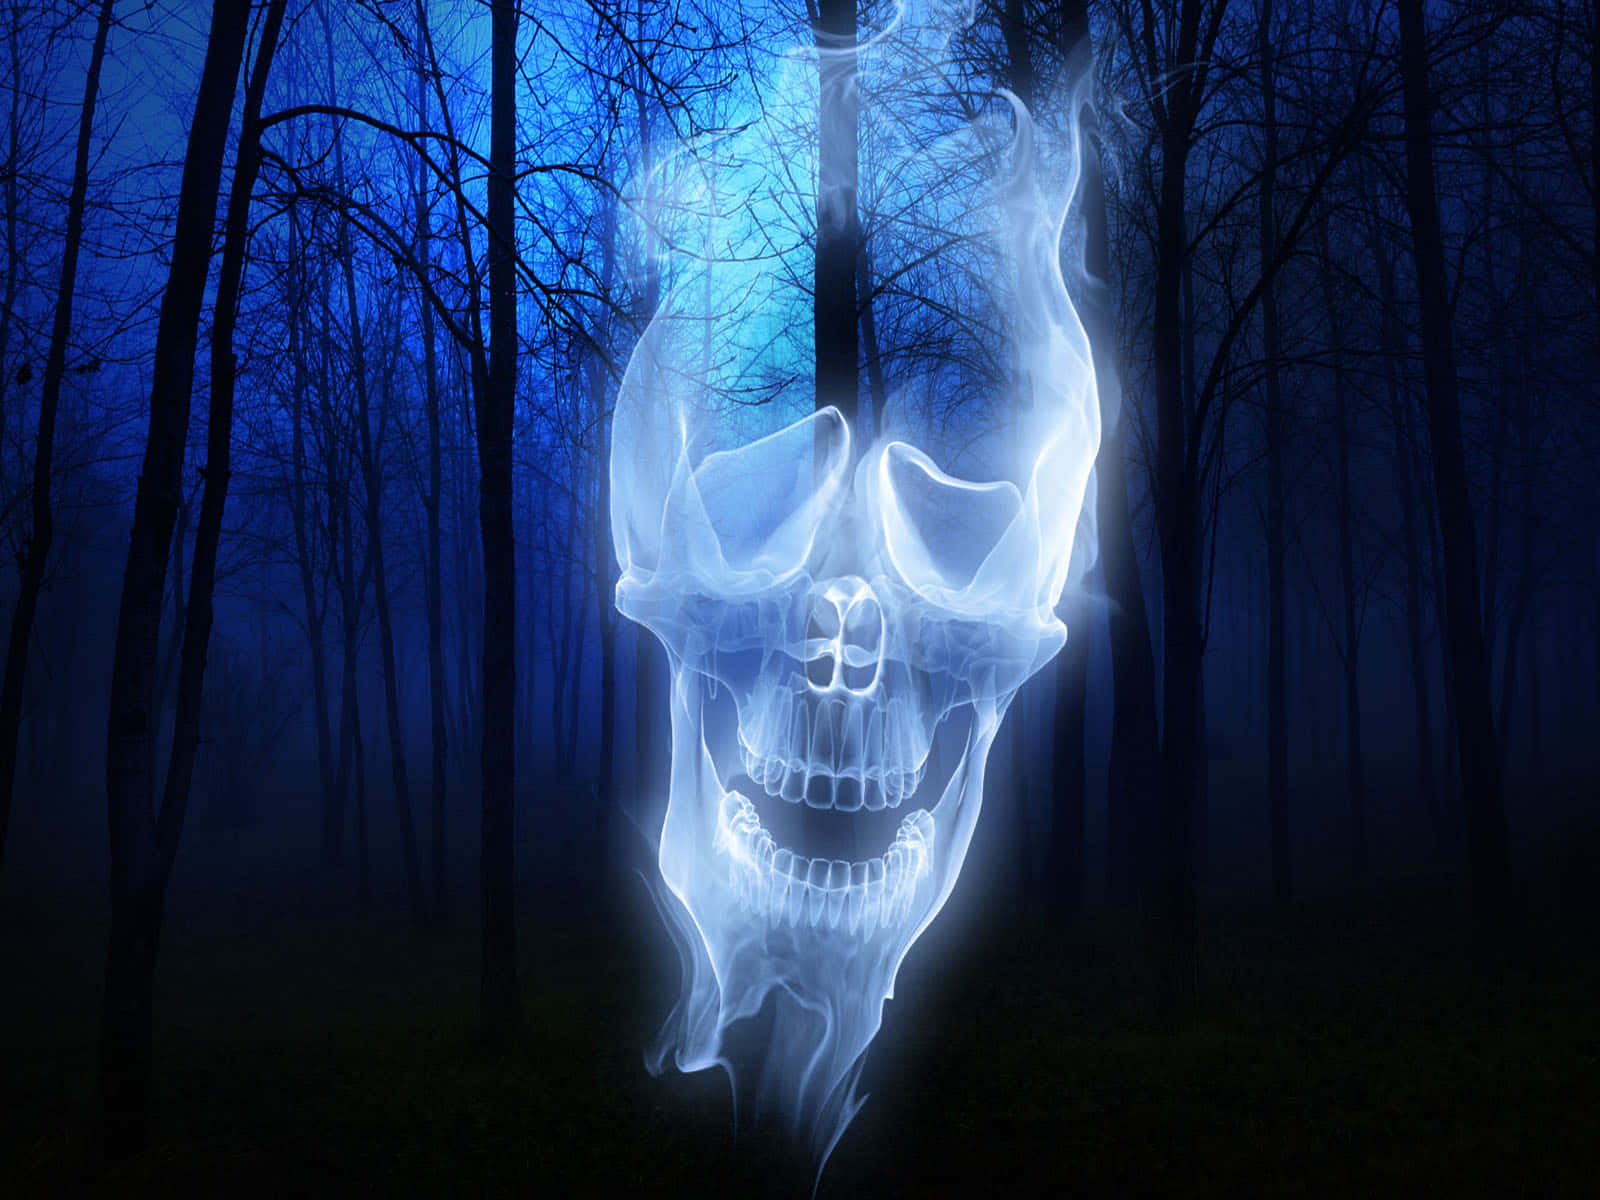 A Ghostly Skull In The Woods